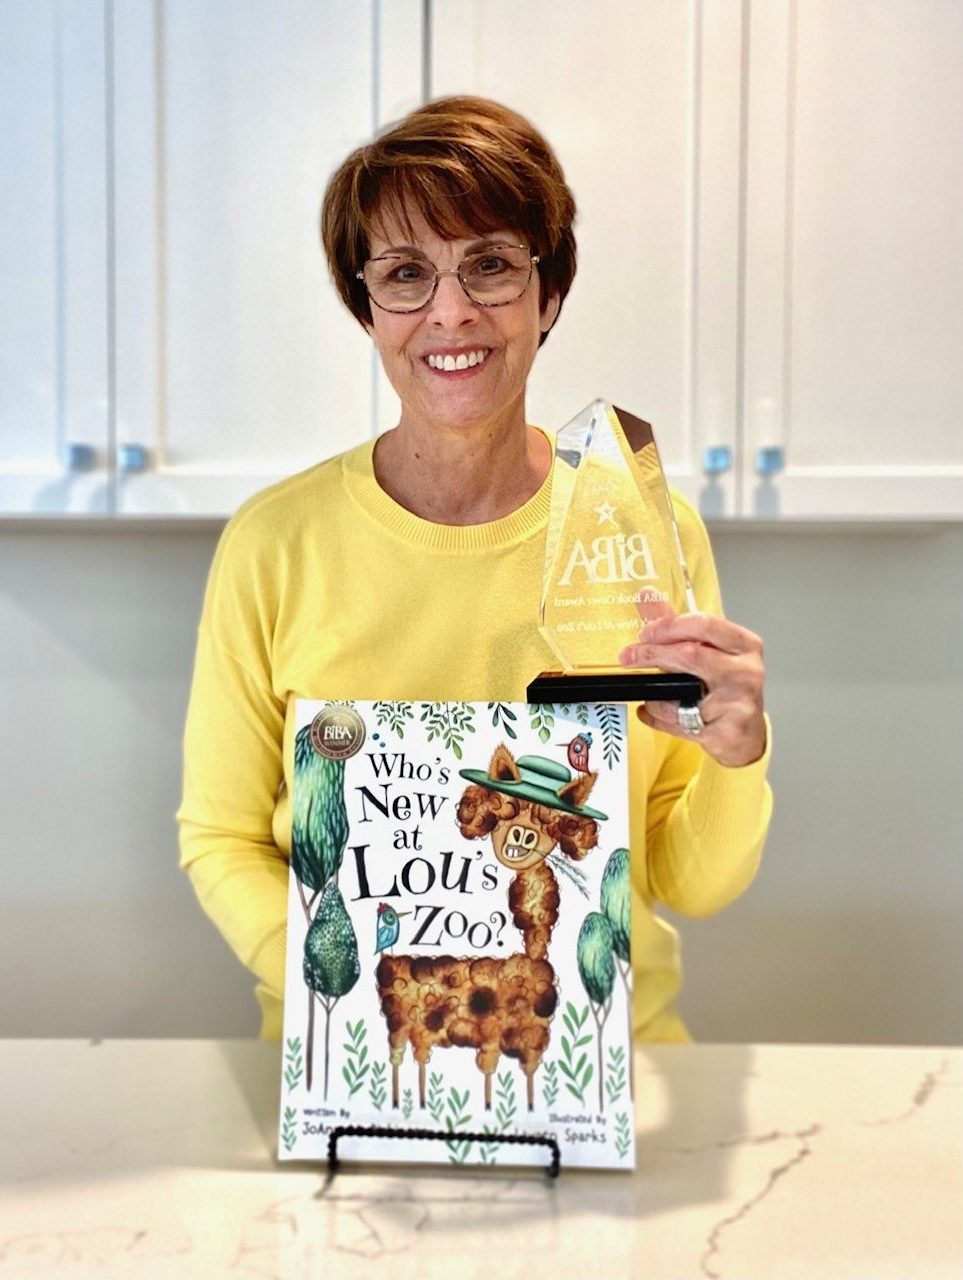 JoAnn Dickinson with her "Best Indie Book Award" for "Who's New At Lou's Zoo."